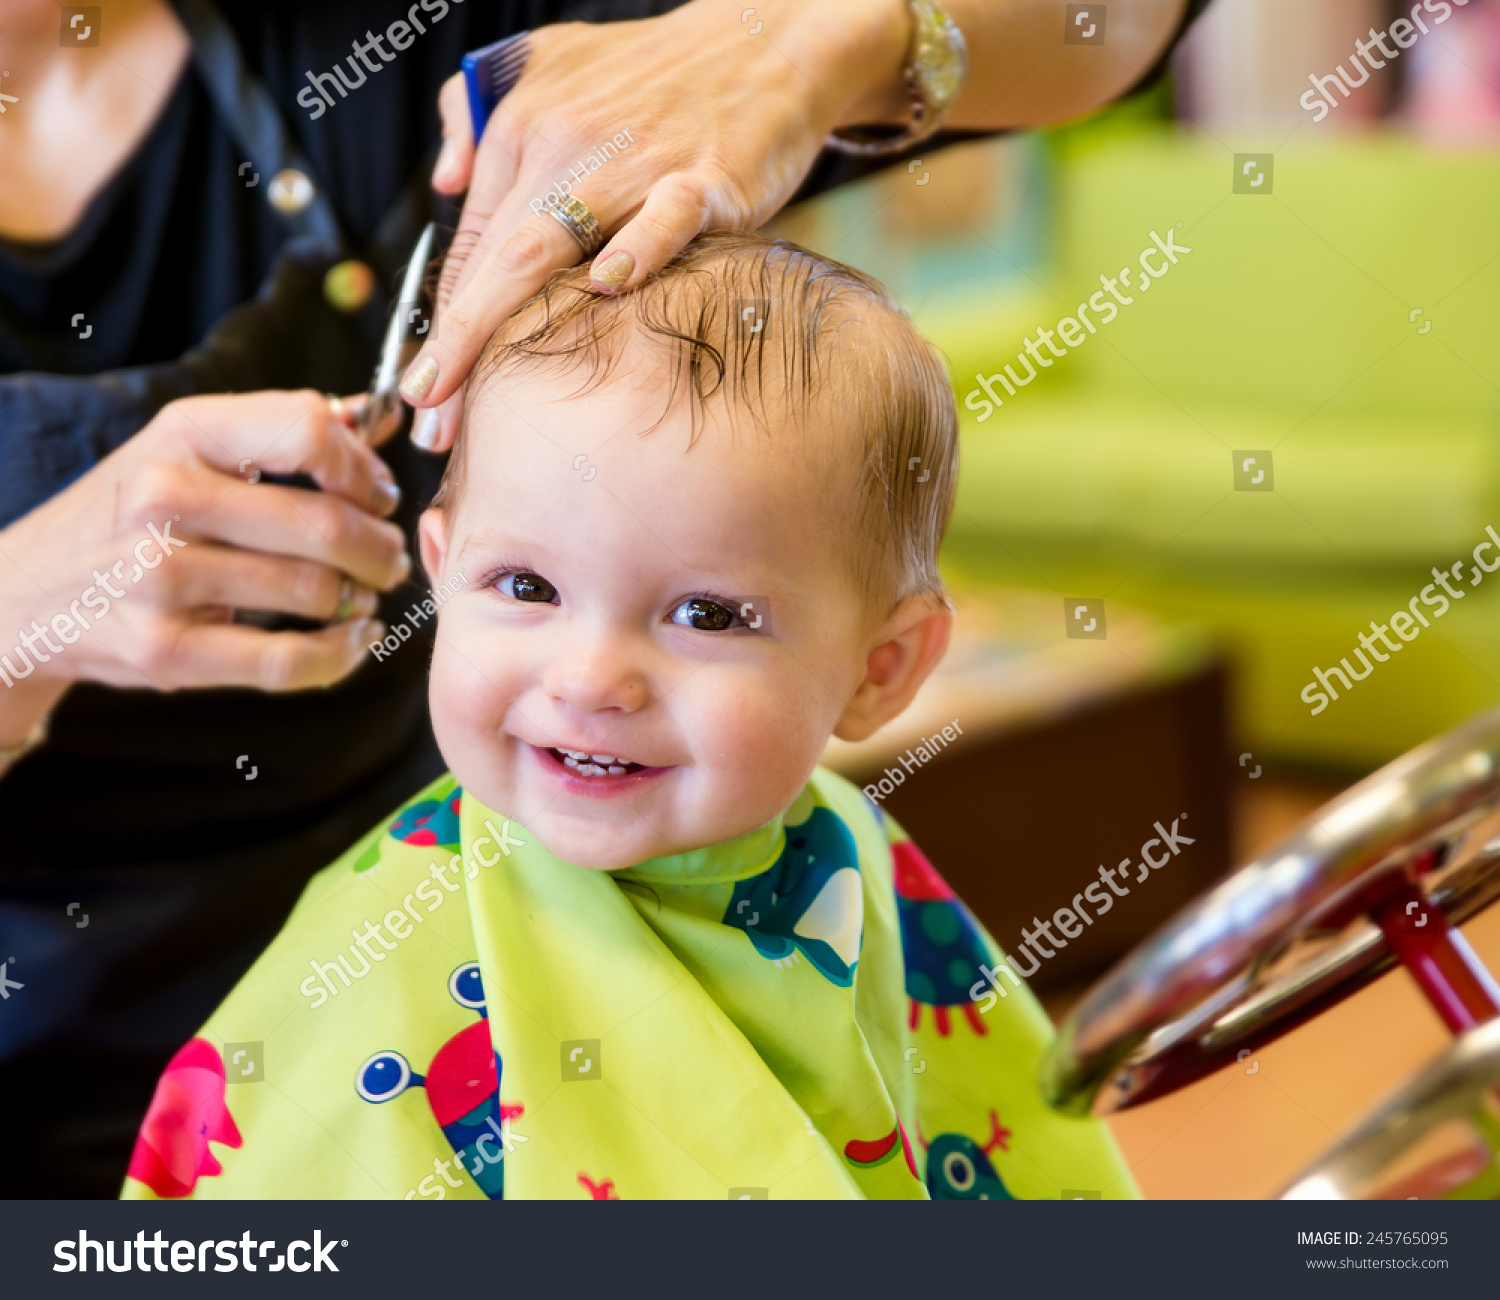 Happy Toddler Child Getting His First People Stock Image